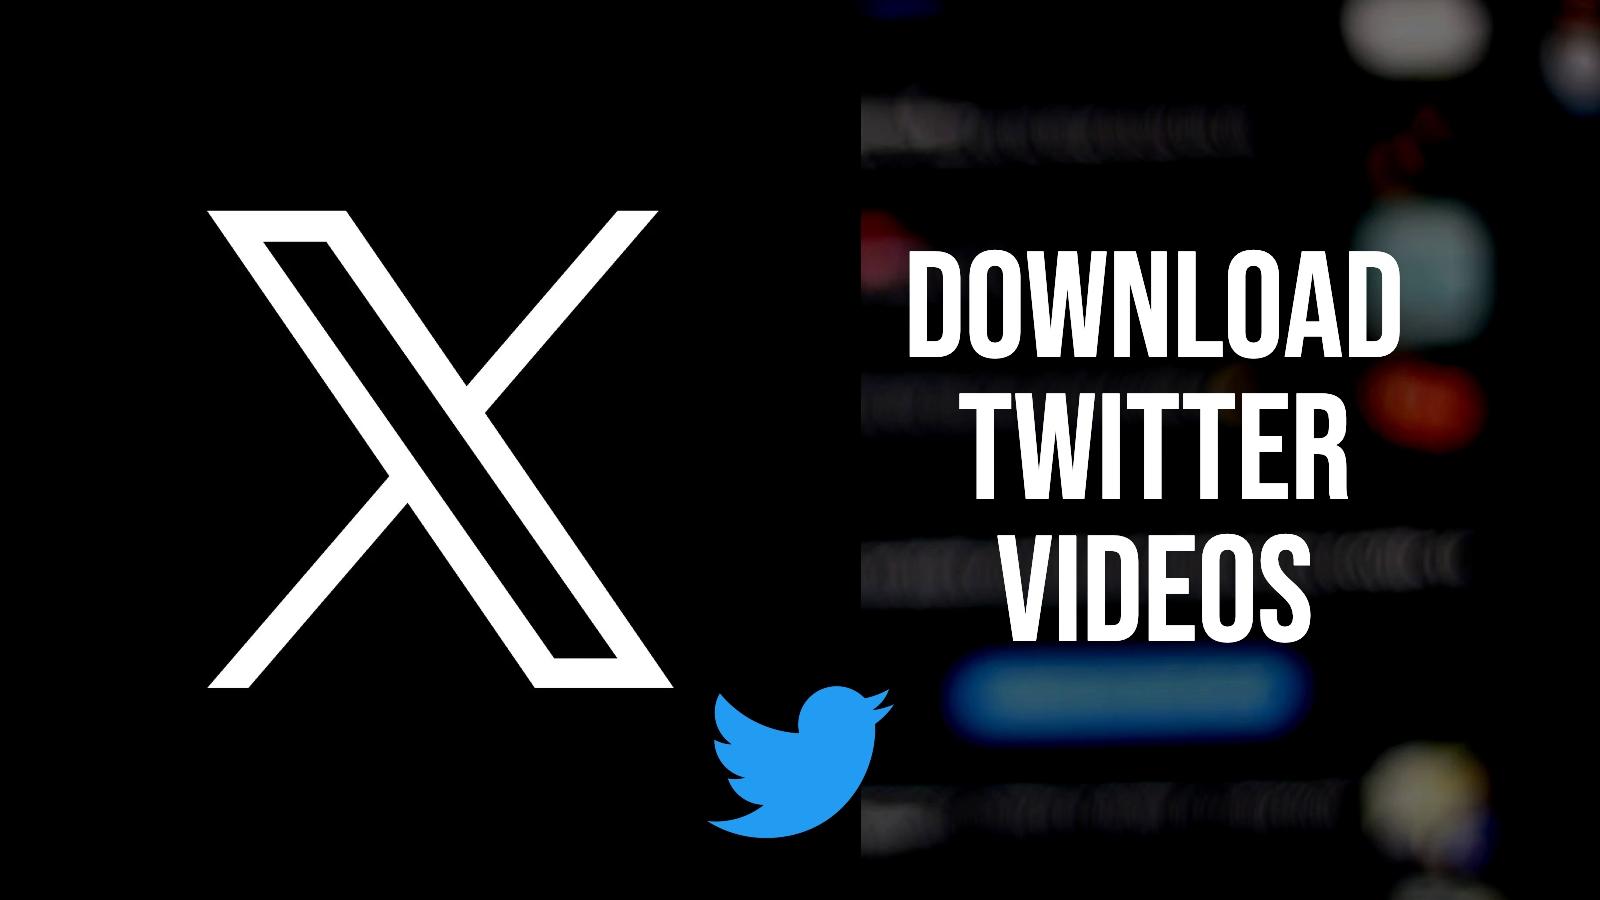 Download Full Hd Xxxvideos - How to download Twitter / X videos straight from the app - Dexerto